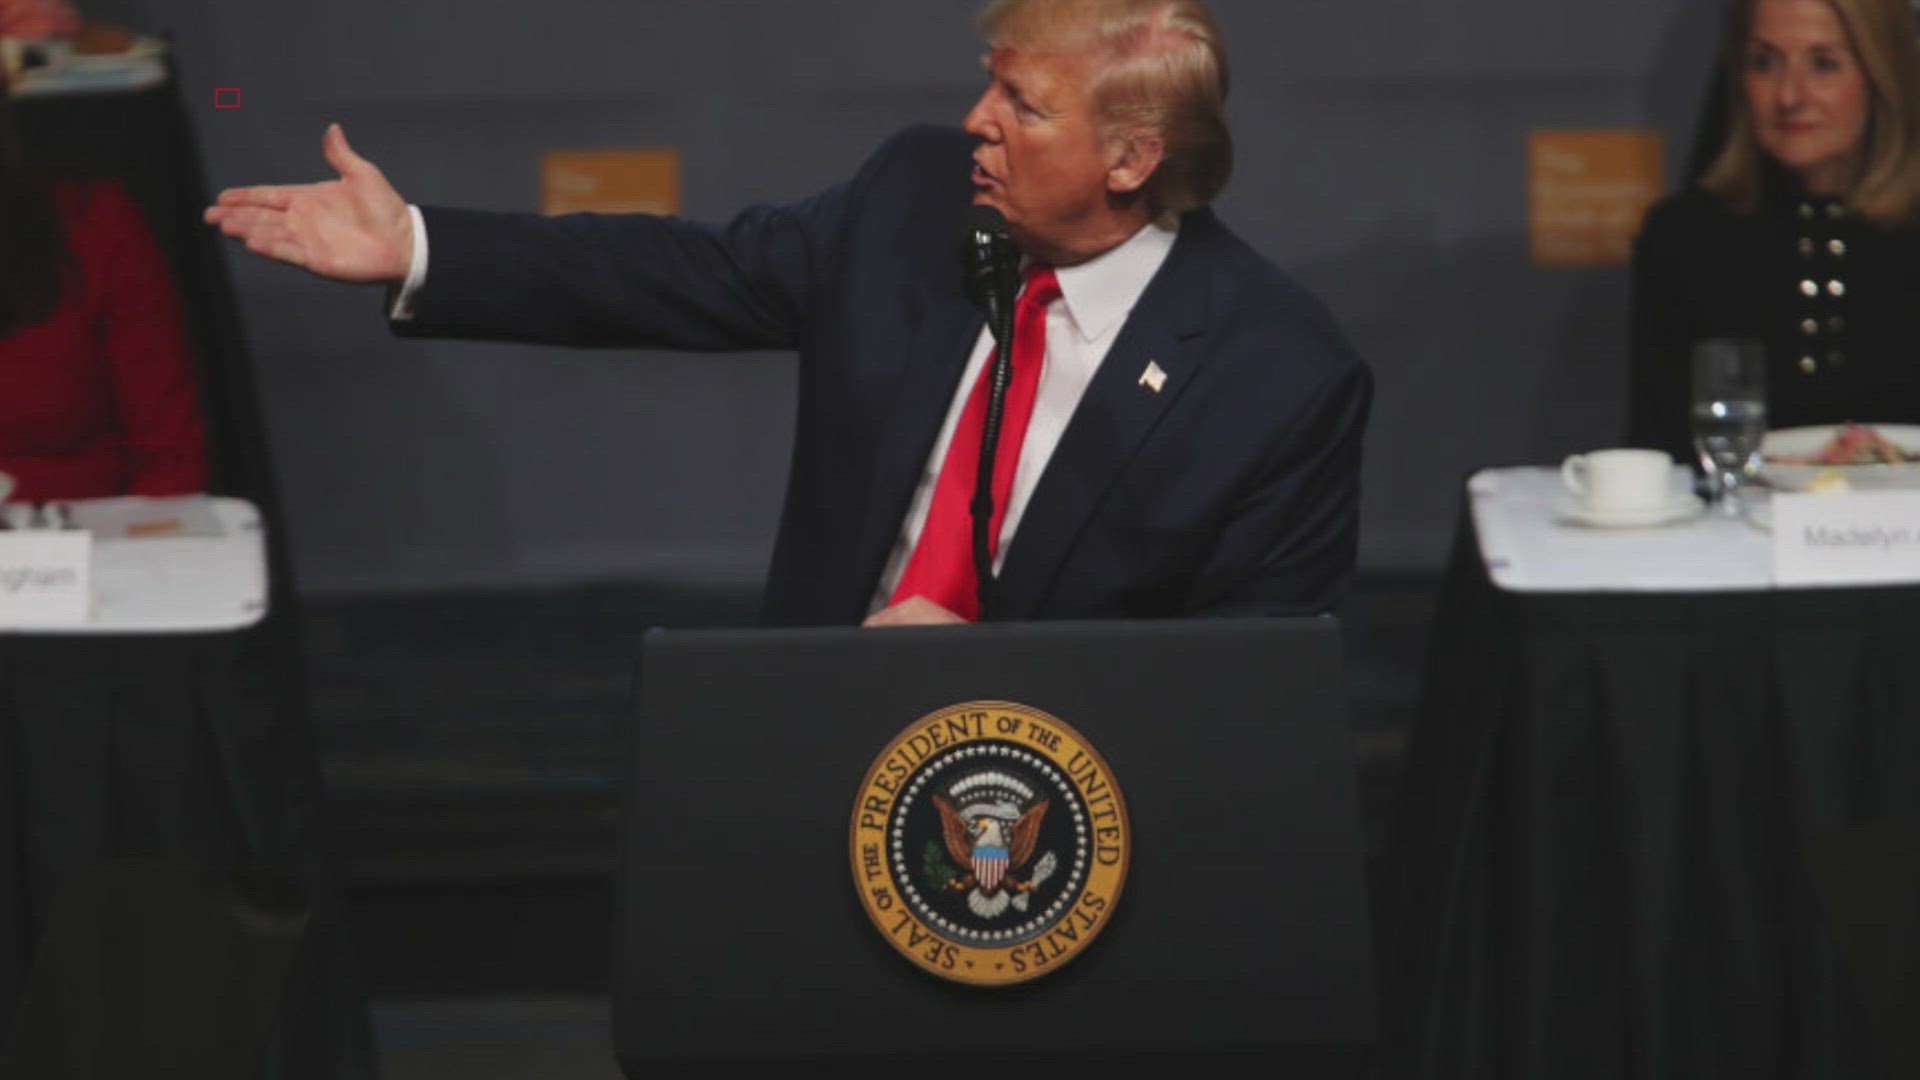 The Washington Post claims President Trump has made a record number of what it calls false or misleading claims in 2019.